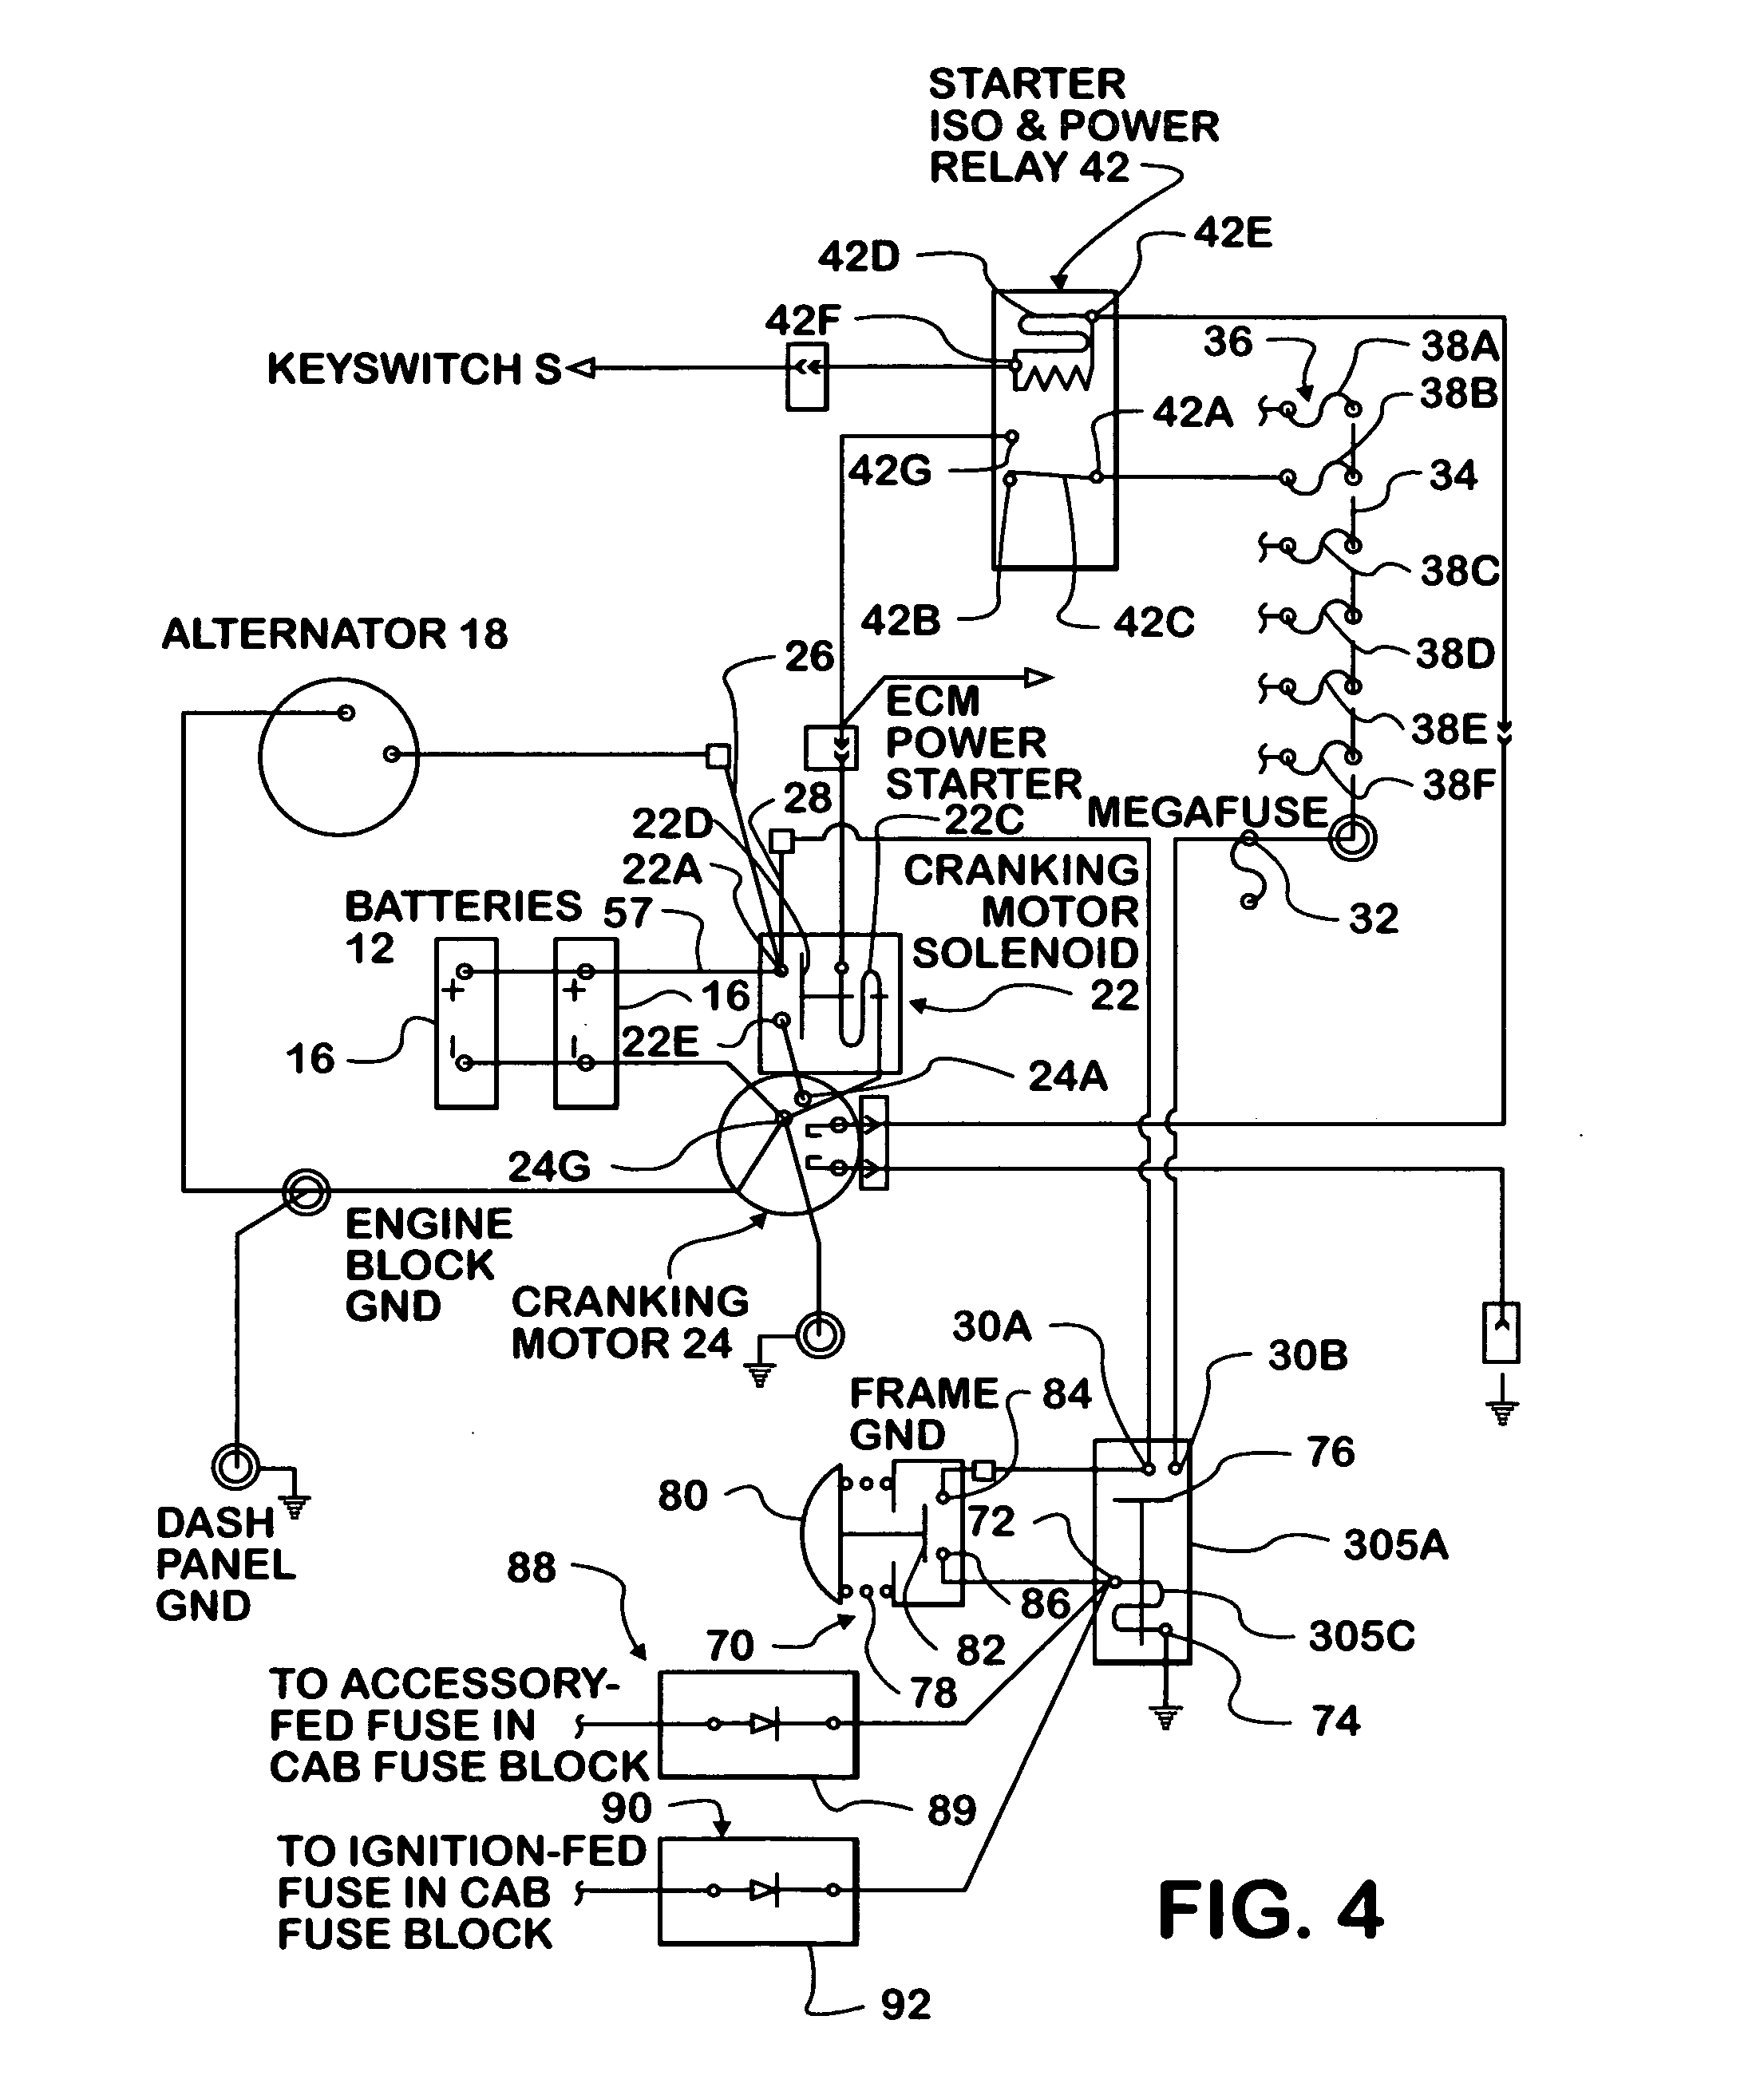 Motor vehicle battery disconnect switch circuits